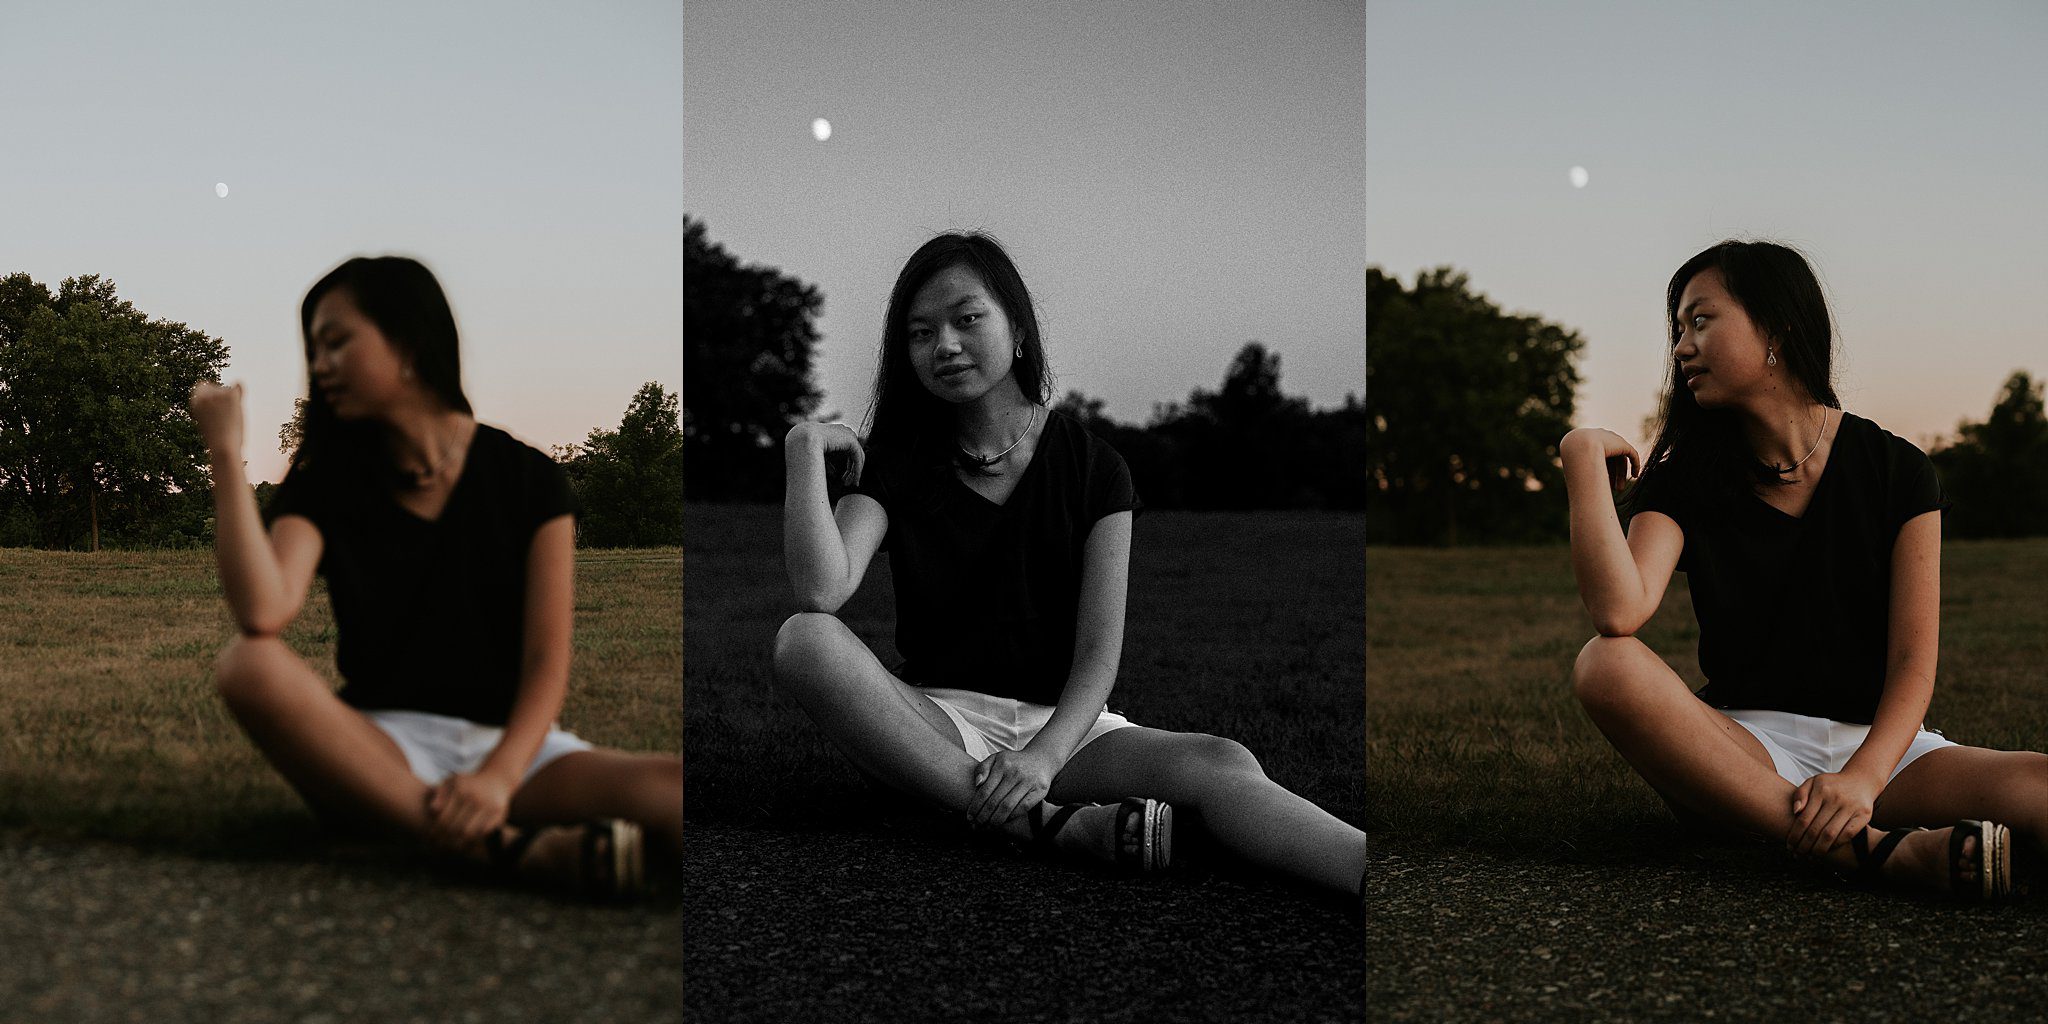 If you want a not boring senior photo you should do this. This is a trip-tic of images. All the same one of a girl sitting with the moon behind her. The photo on the left the girl is out of focus with the moon in focus in the background. Center photo the girl with black hair and a black shirt and white shorts is sitting with her elbow on her knee looking at the camera with the moon in the background. On the photo on the right the girl is siting the same way and looking off to the left. 